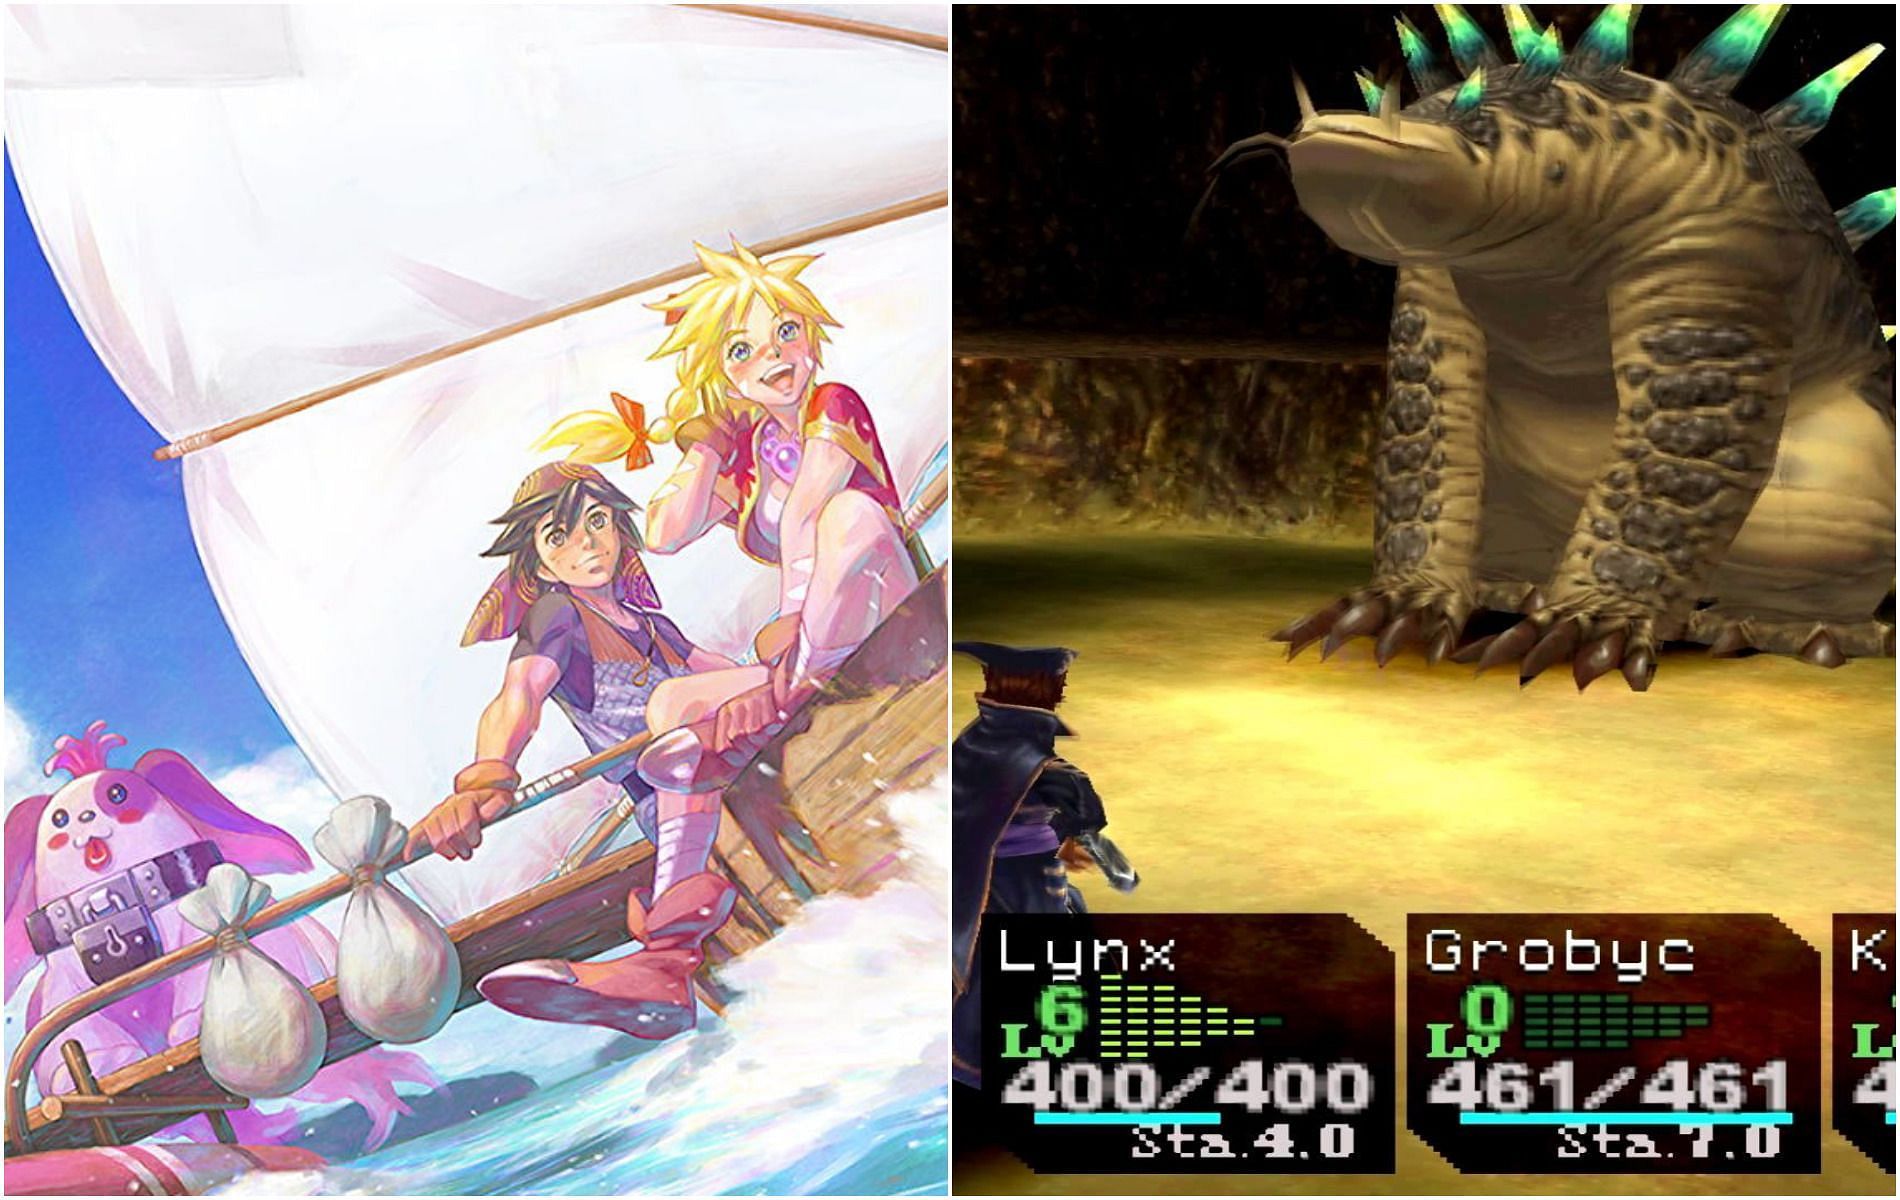 The enhanced version of the 1999 game features some challenging bosses (Images via Square Enix)